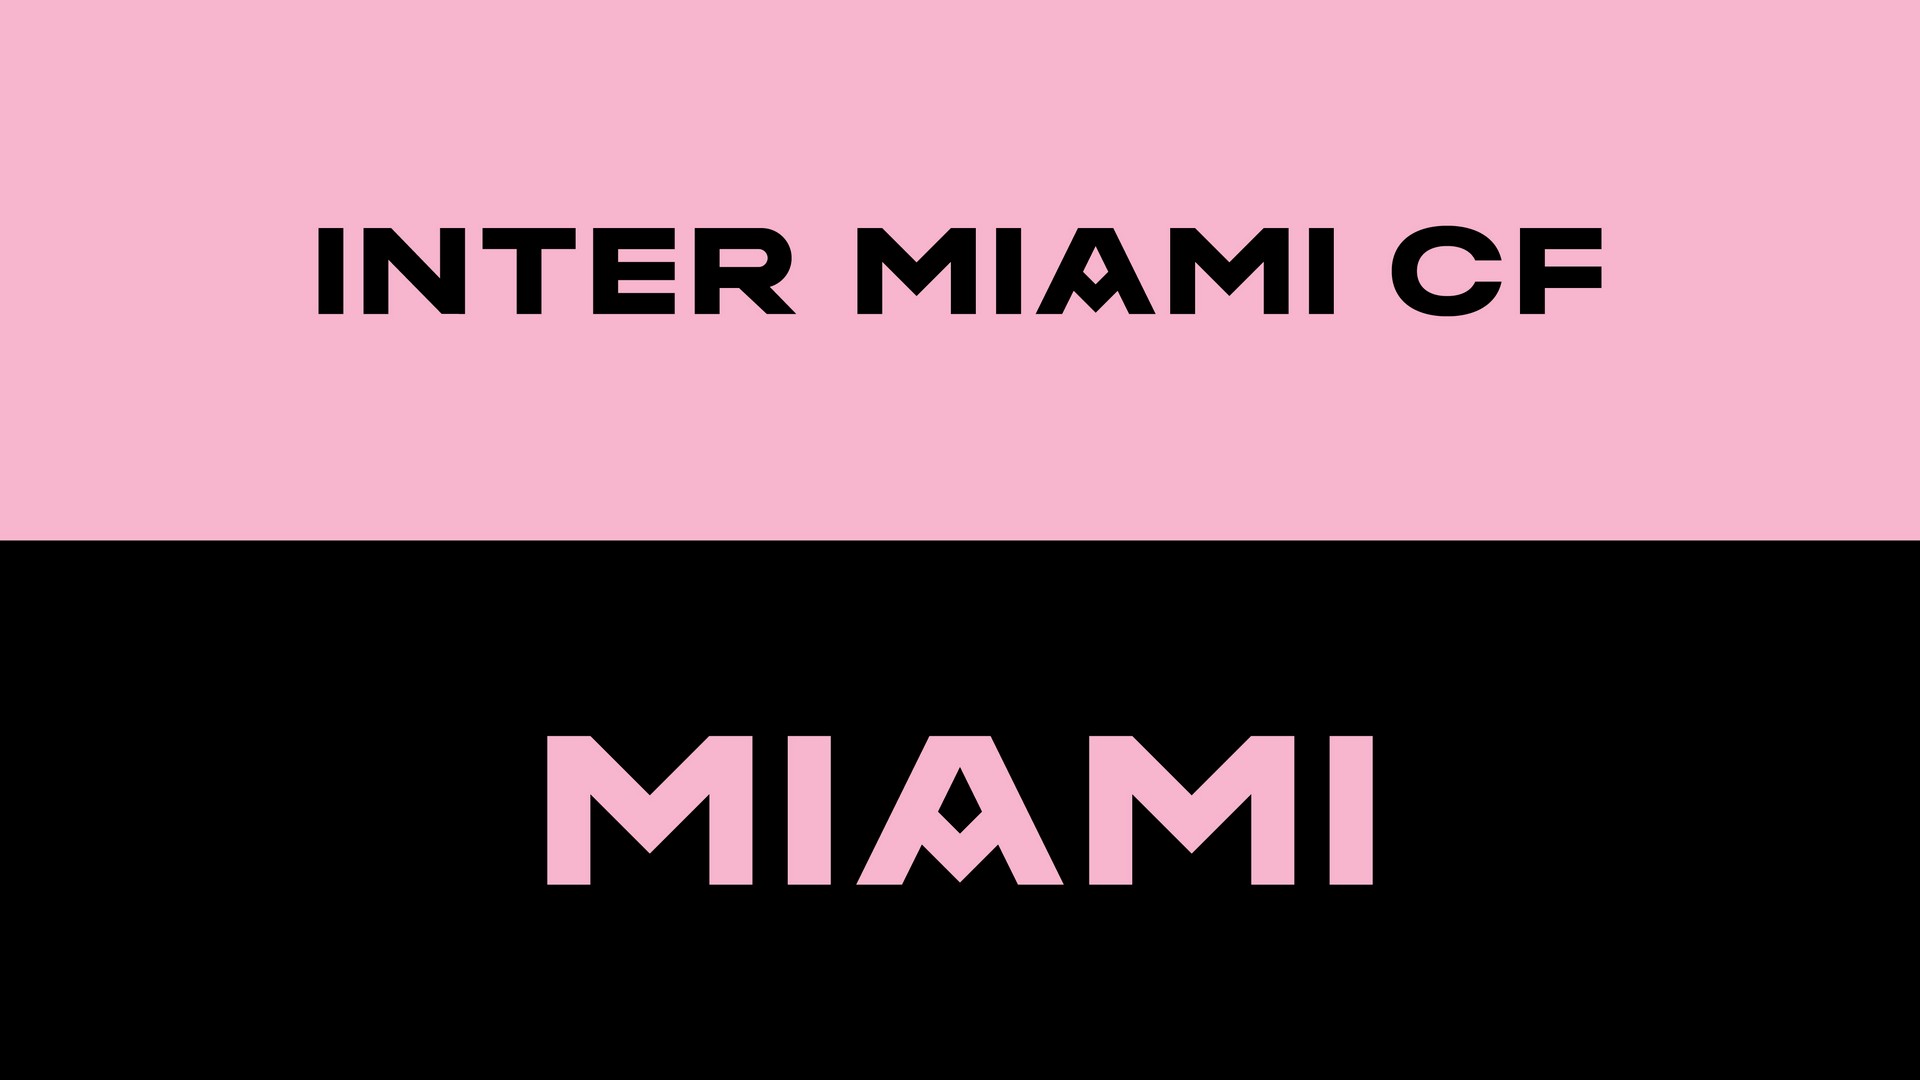 HD Desktop Wallpaper Inter Miami CF With high-resolution 1920X1080 pixel. You can use this wallpaper for your Desktop Computers, Mac Screensavers, Windows Backgrounds, iPhone Wallpapers, Tablet or Android Lock screen and another Mobile device